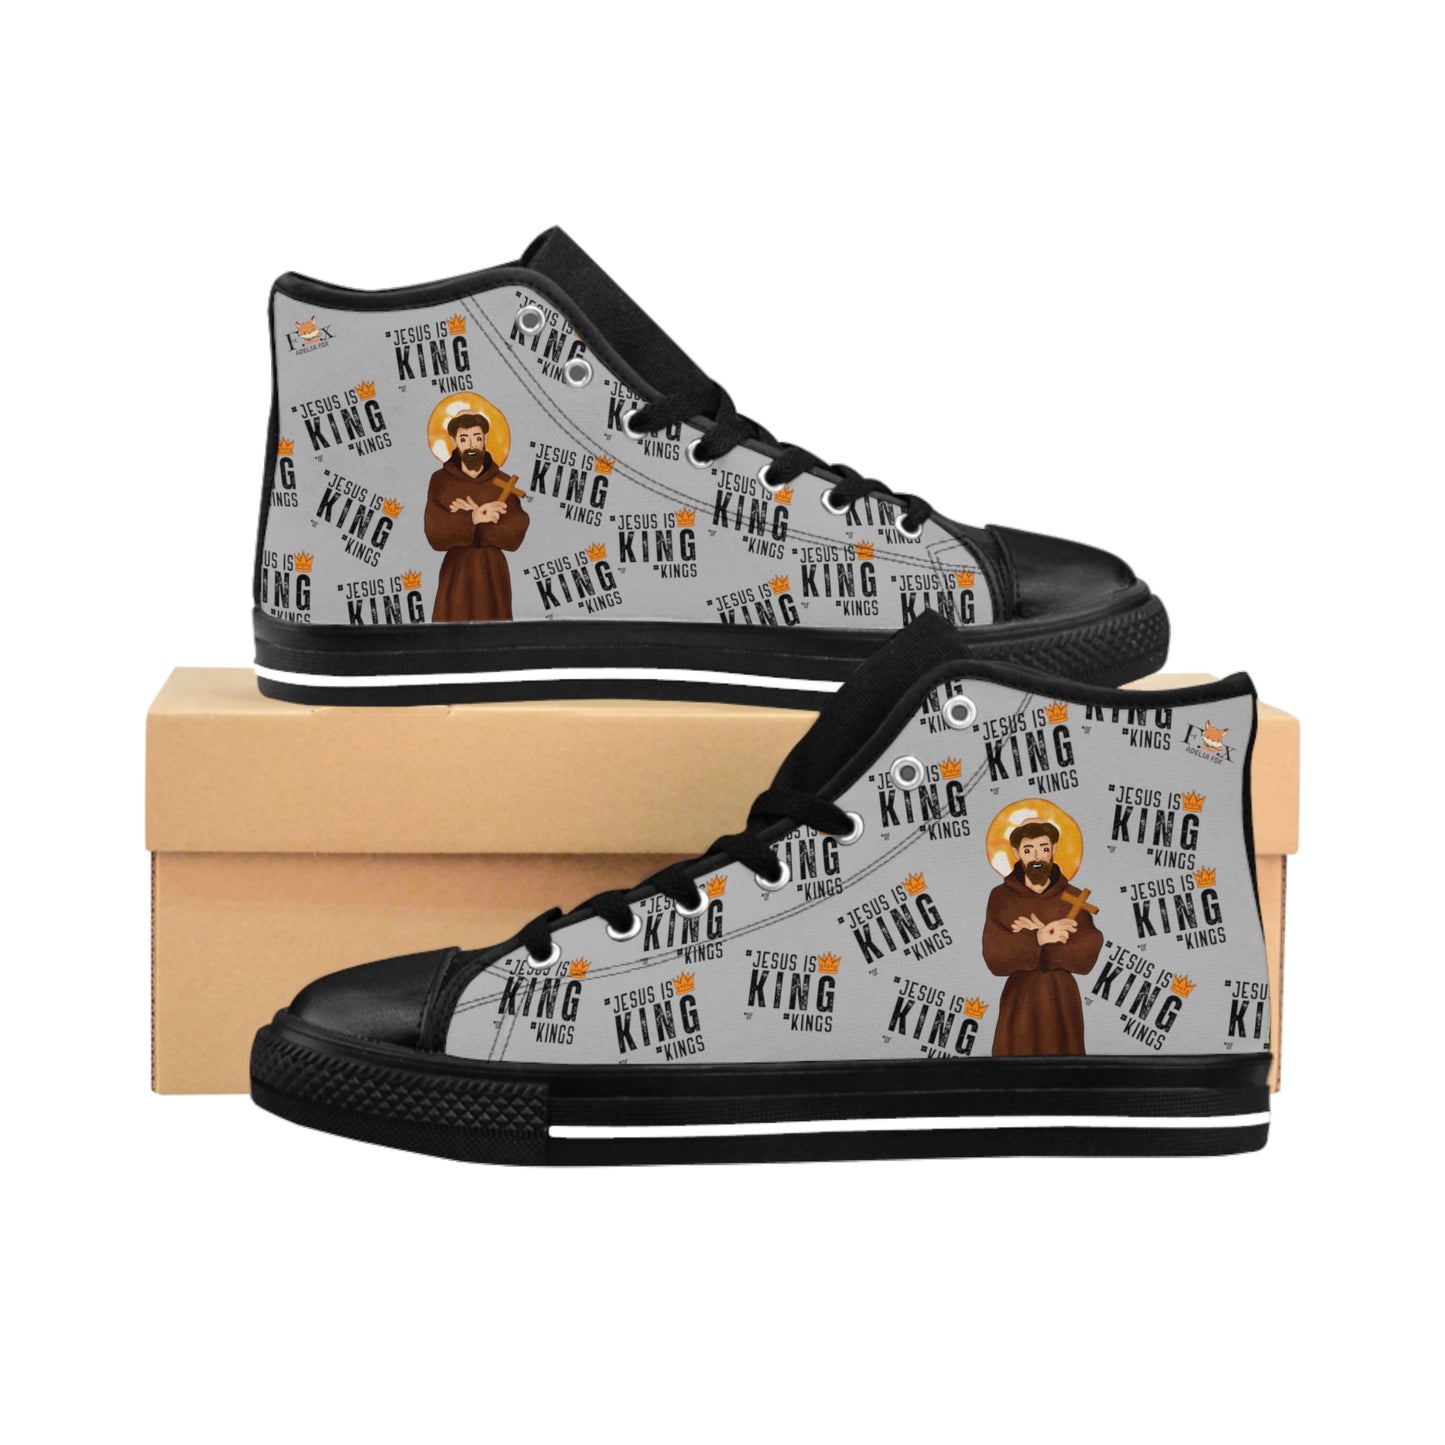 Men's High Top Sneakers -Saint Francis of Assisi [Hard and resistant toe protection on the top ]